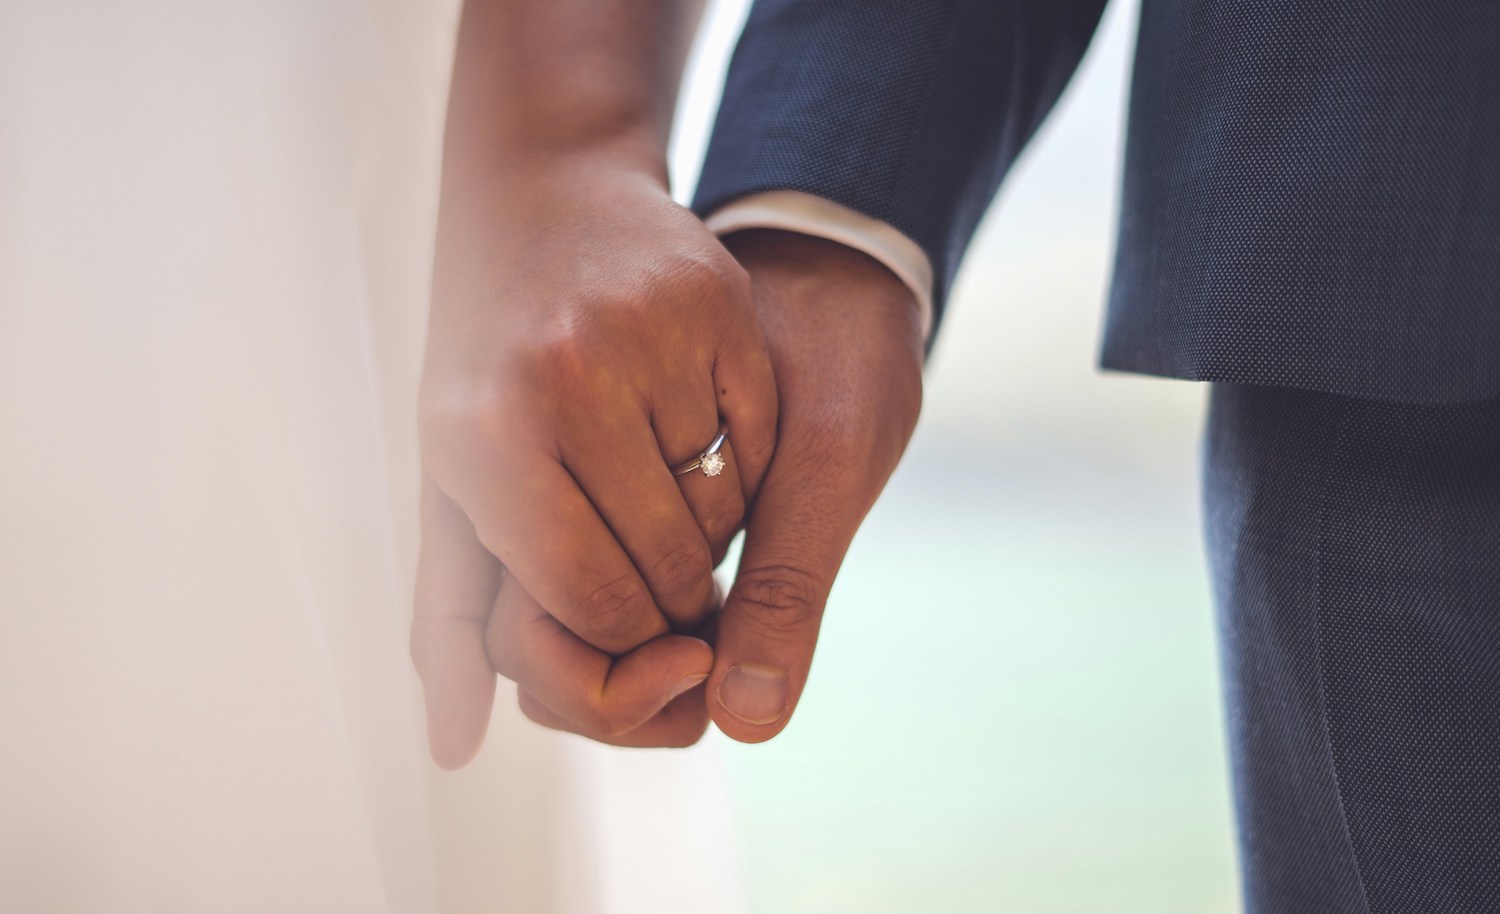 Happily Ever After: Financial Planning for Newlyweds